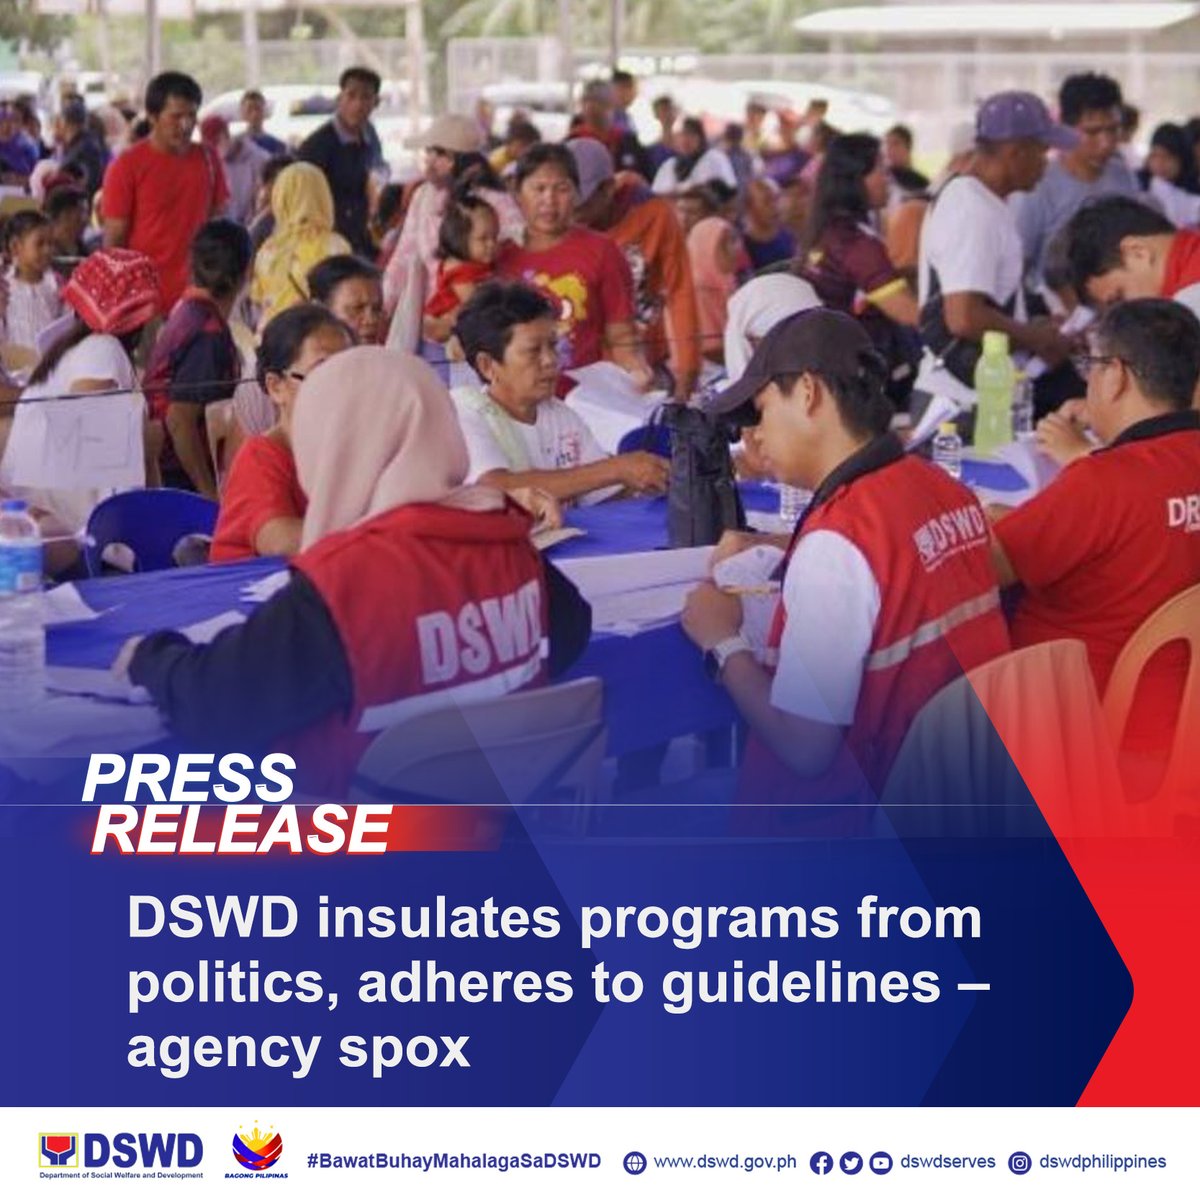 𝗗𝗦𝗪𝗗 𝗣𝗥𝗘𝗦𝗦 𝗥𝗘𝗟𝗘𝗔𝗦𝗘: DSWD insulates programs from politics, adheres to guidelines – agency spox The Department of Social Welfare and Development (DSWD) ensures that its programs and services are insulated from politics and maintains the highest level of…